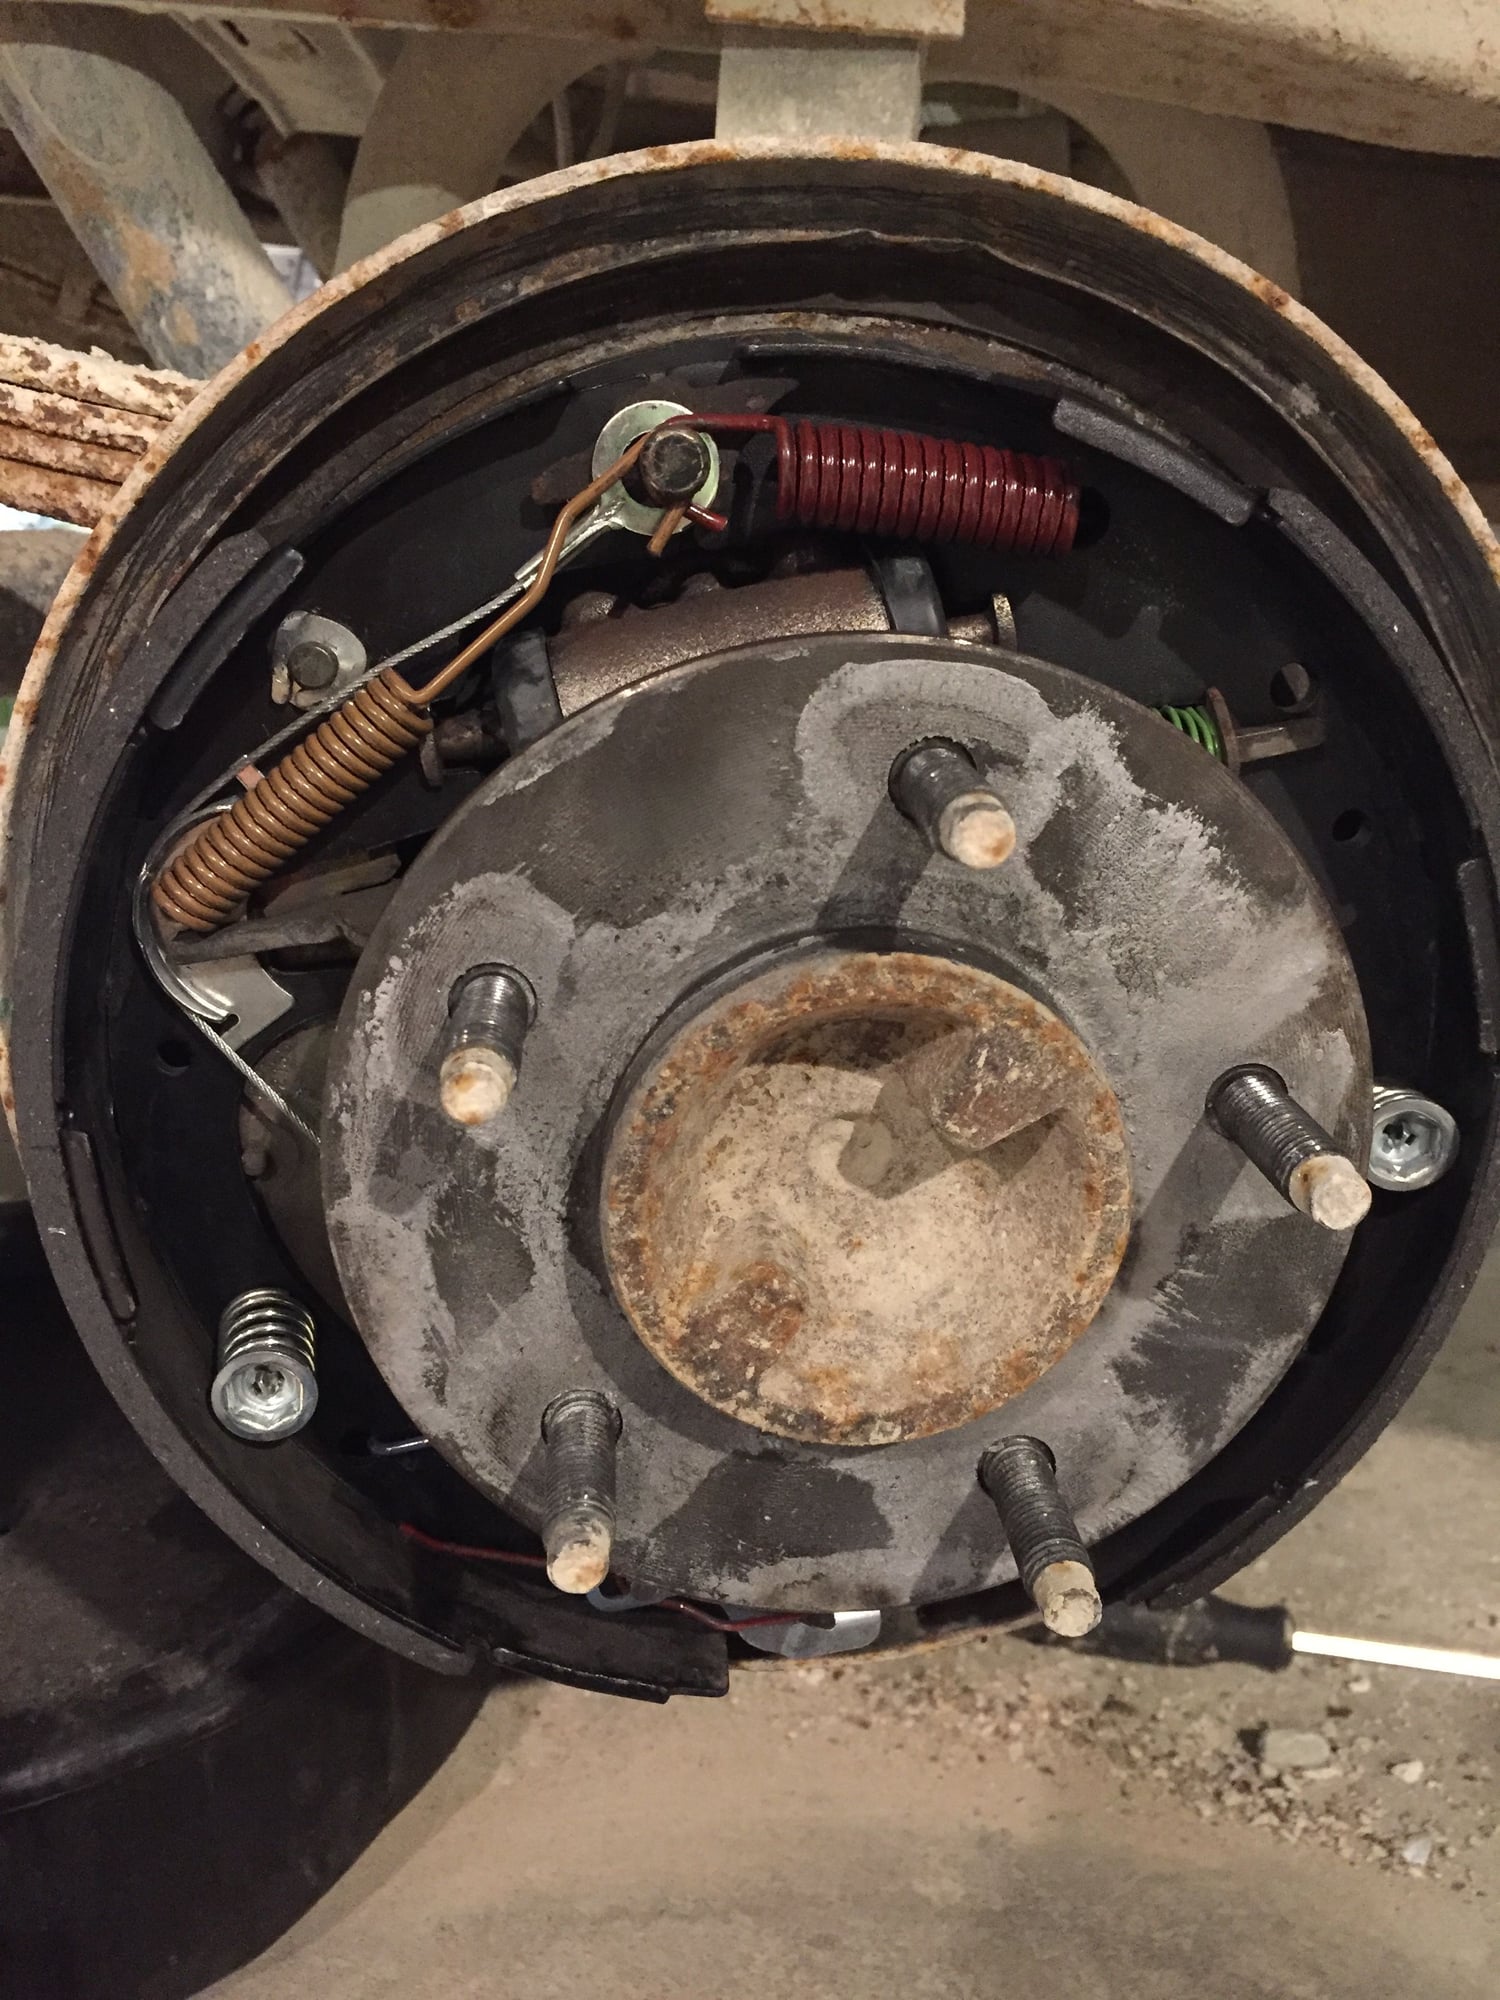 99 f 150 drum brake issues - Ford F150 Forum - Community of Ford Truck Fans